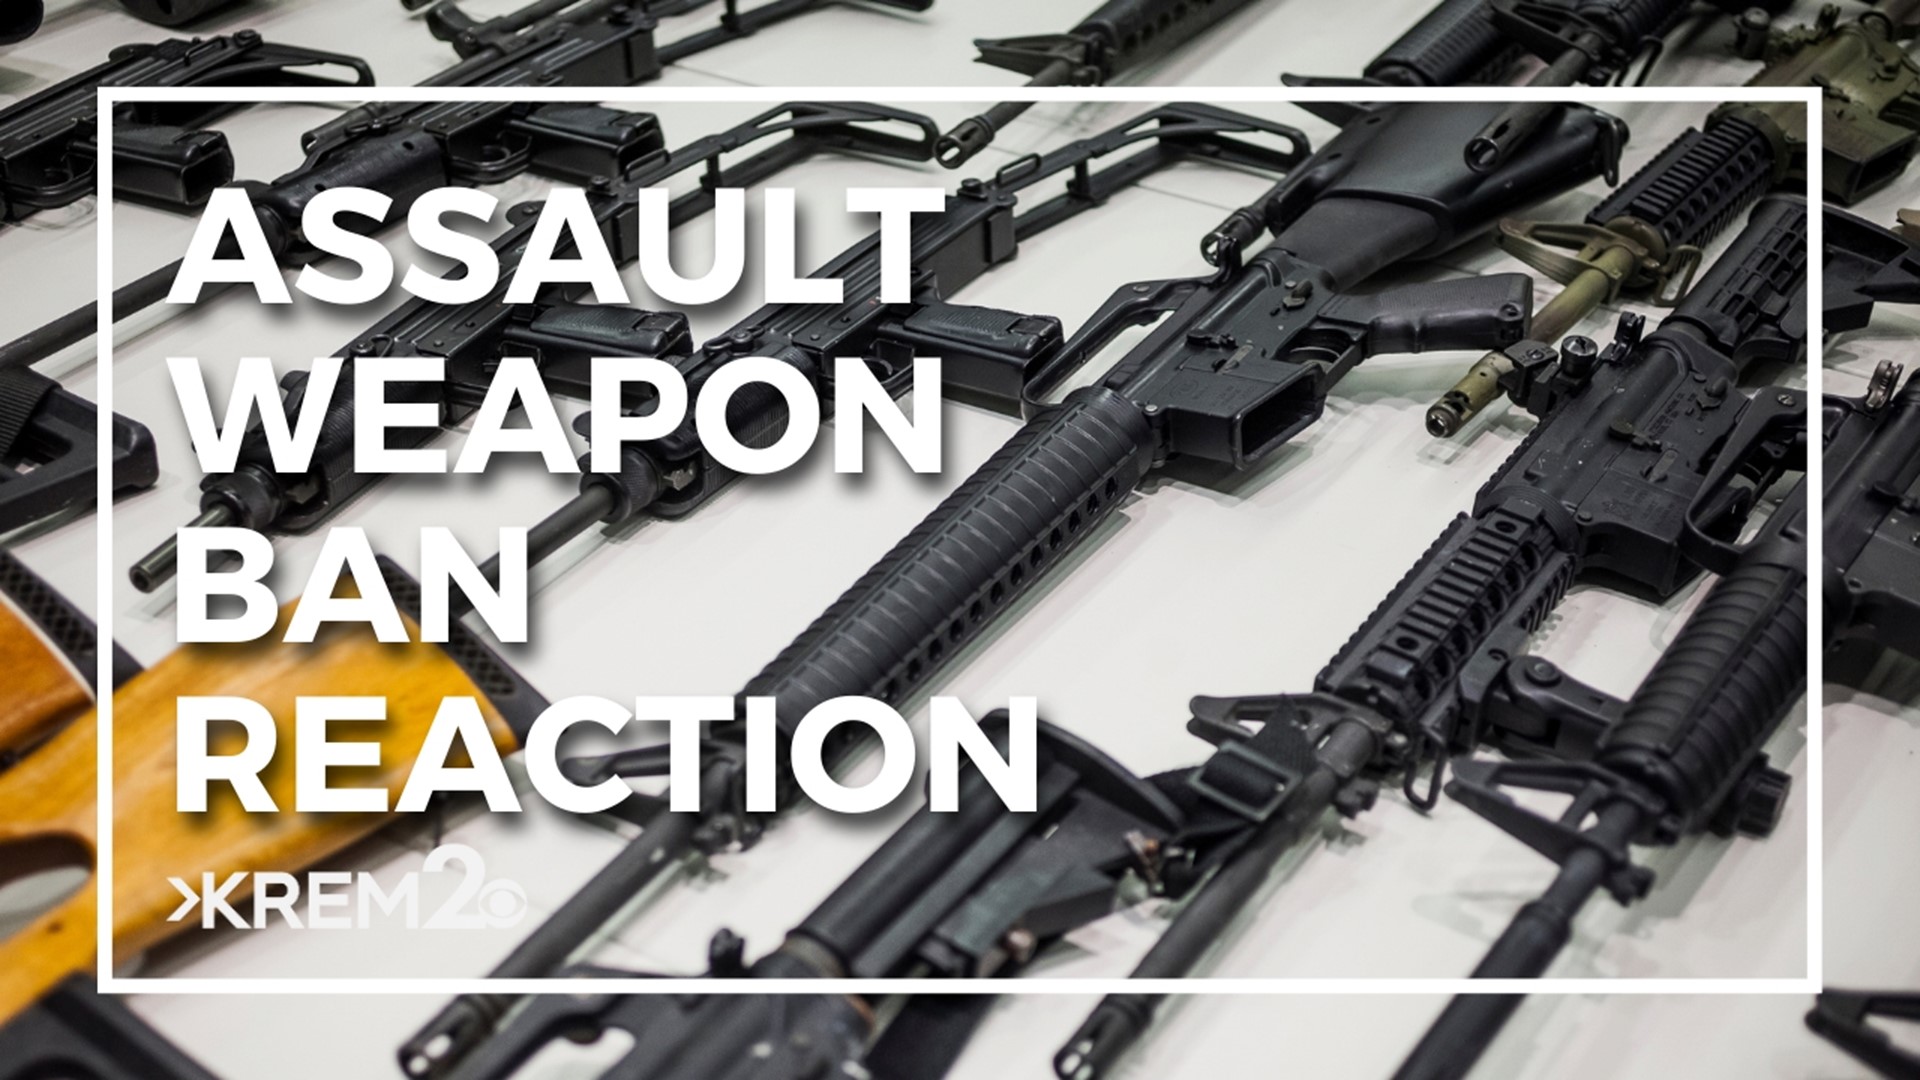 House Bill 1240 bans the sale and manufacture of any assault weapon in the state.